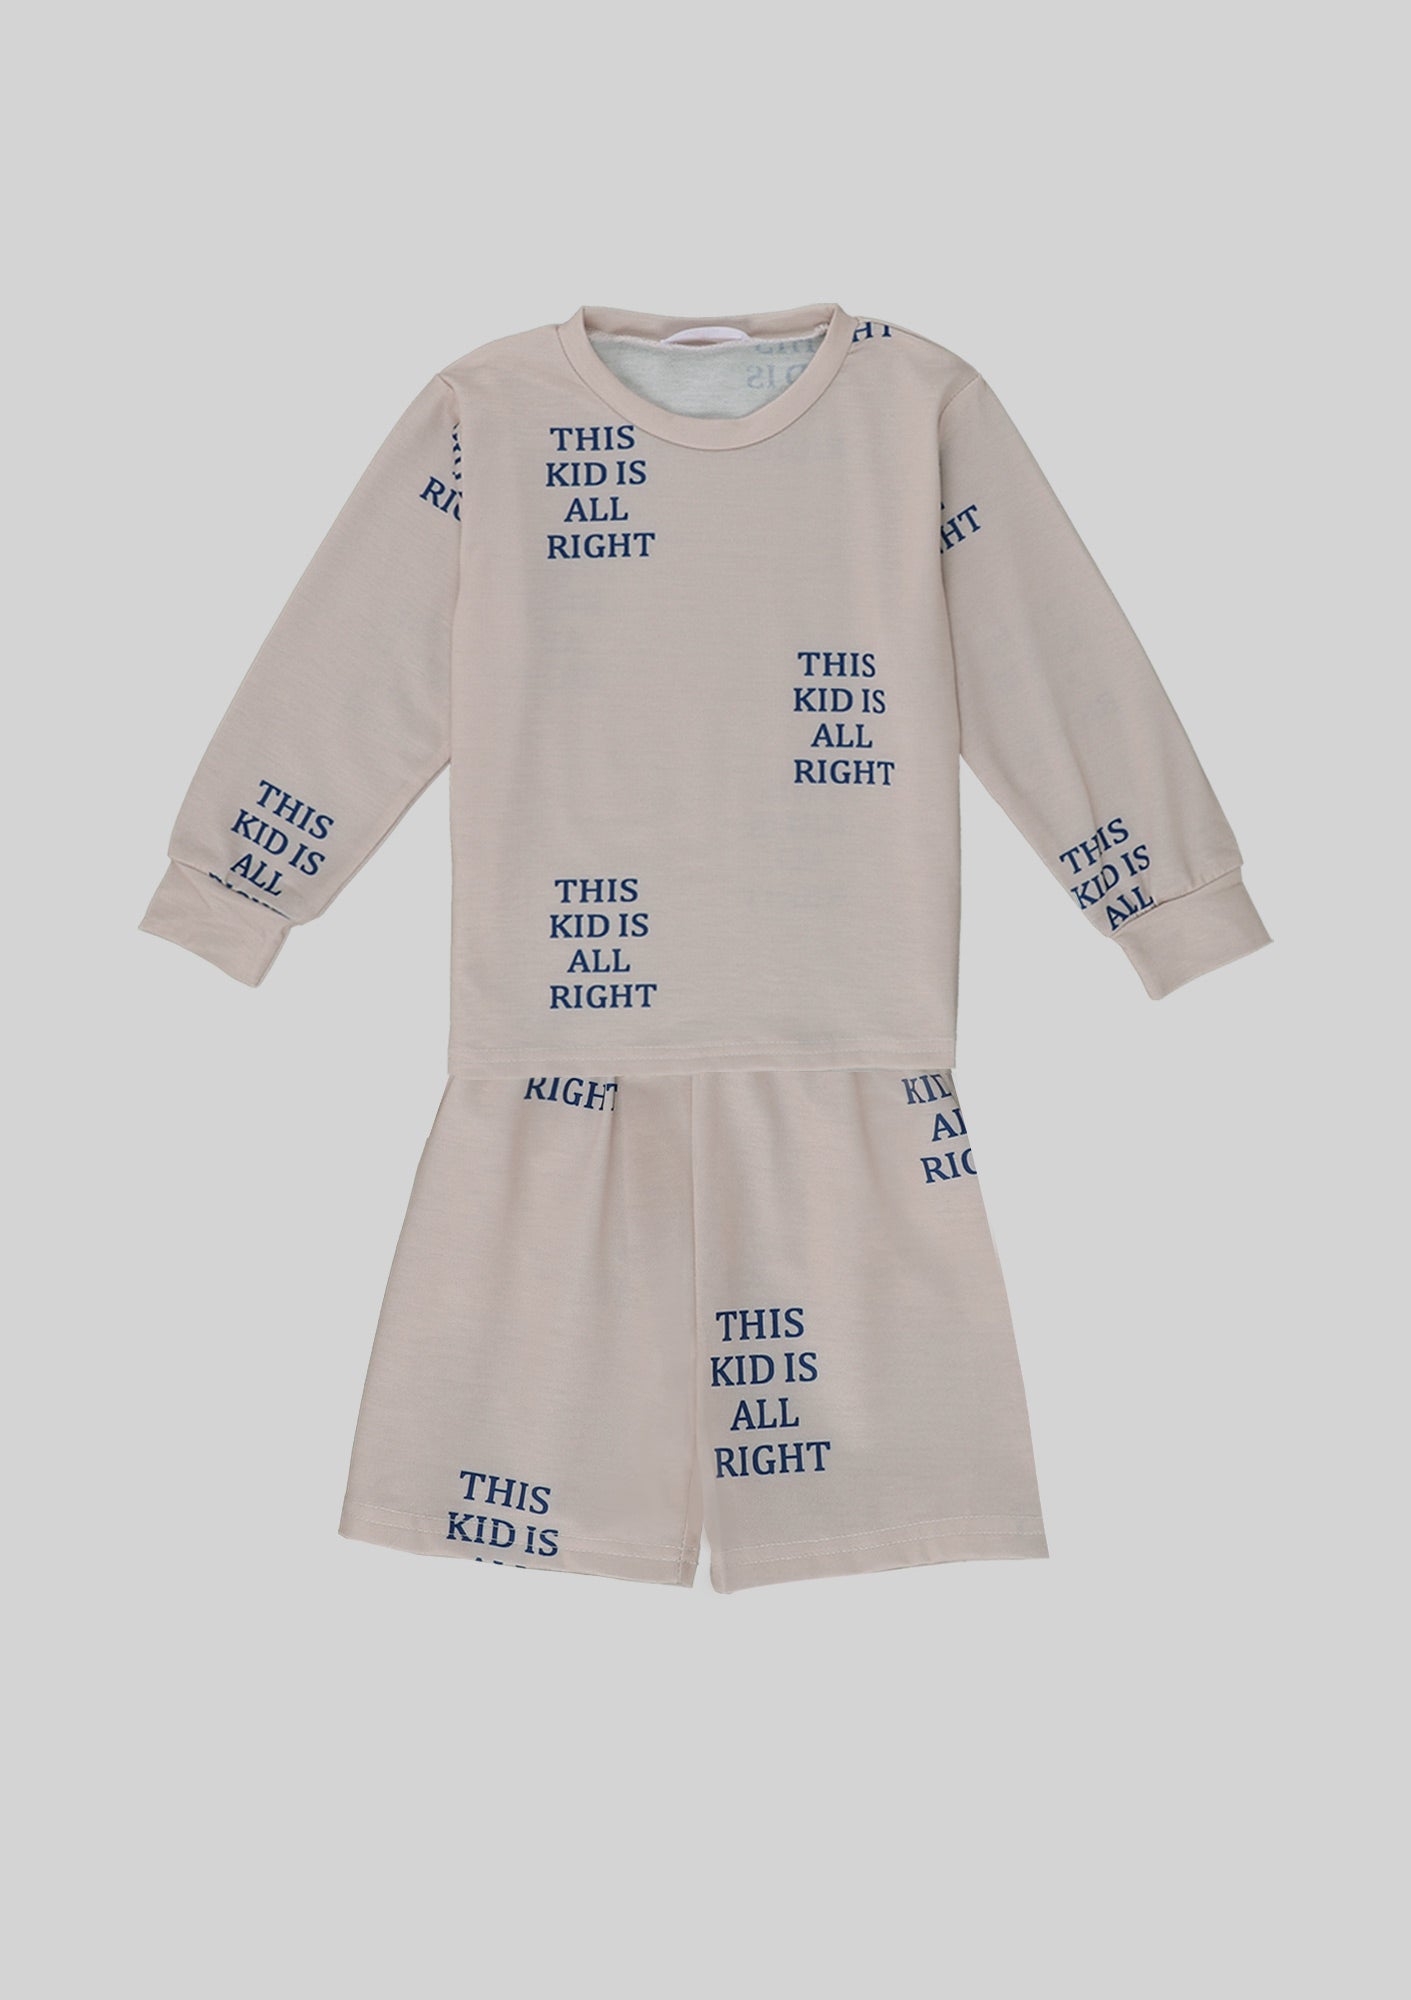 'This Kid Is All Right' Shorts Playset